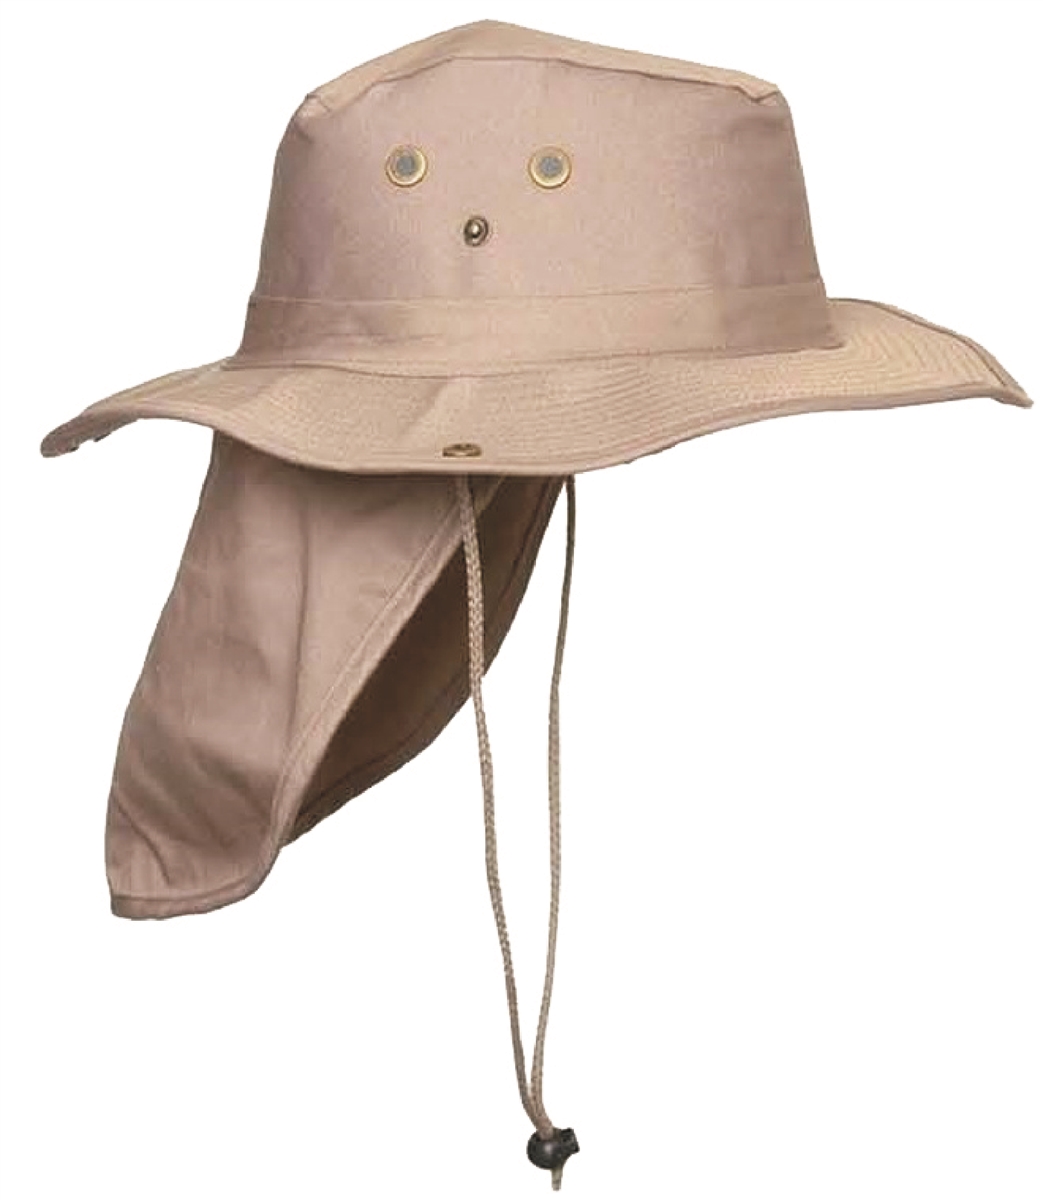 bush hat with a back flap to protect the back of the neck - hFB001